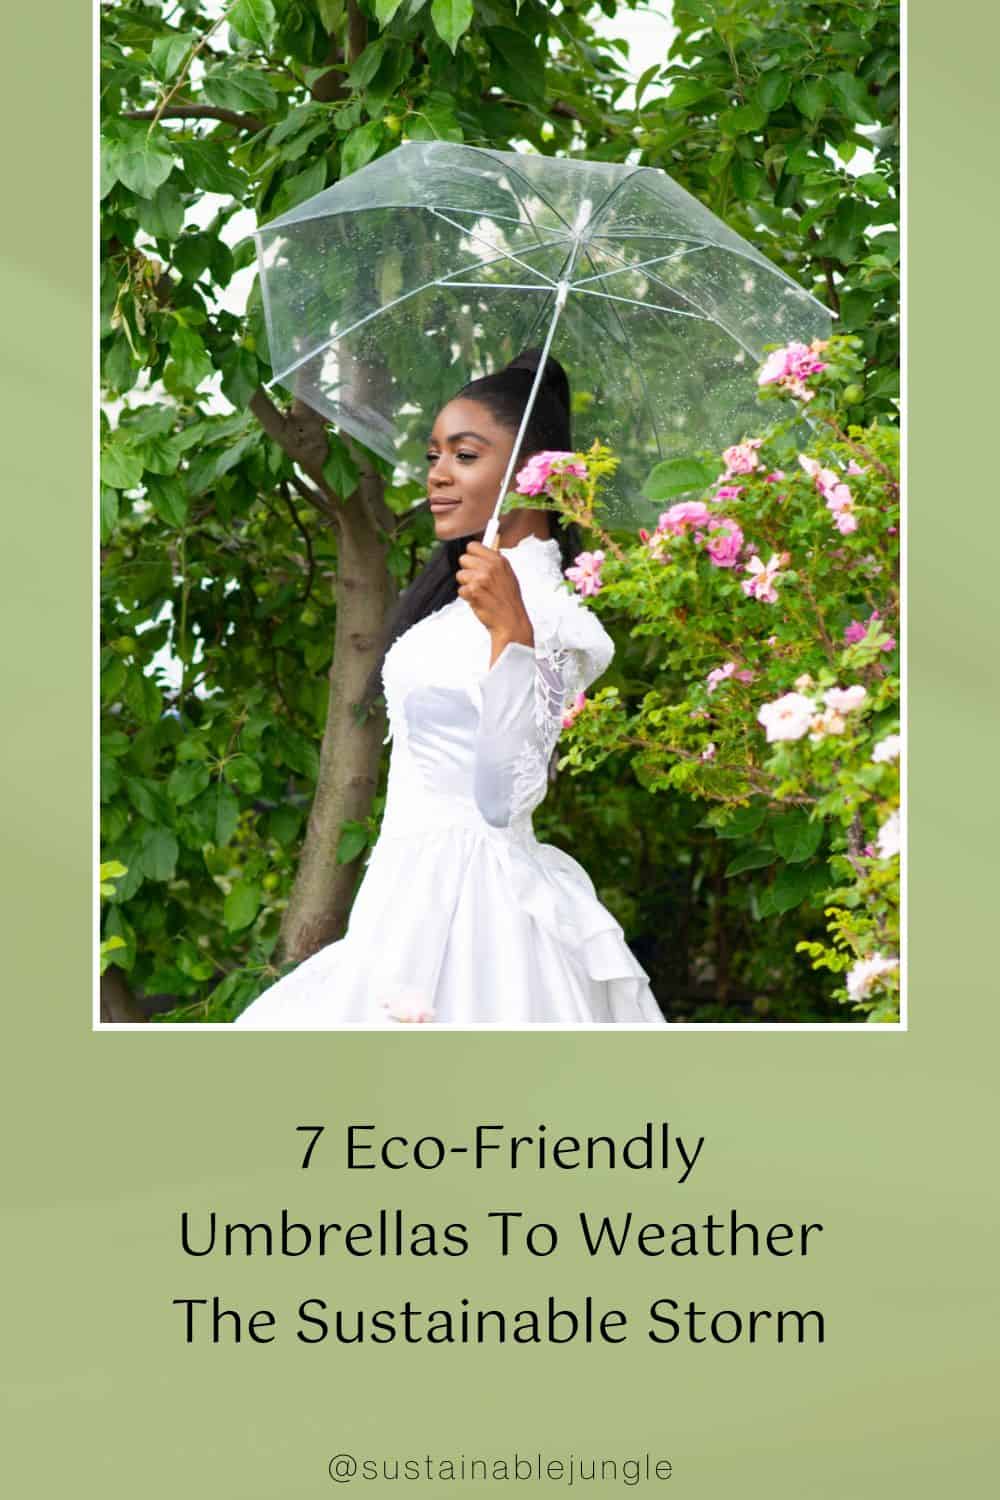 7 Eco-Friendly Umbrellas To Weather The Sustainable Storm Image by Jollybrolly #ecofriendlyumbrellas #sustainableumbrellas #recycledumbrella #sustainableumbrellabrands #ecoumbrella #sustainablejungle